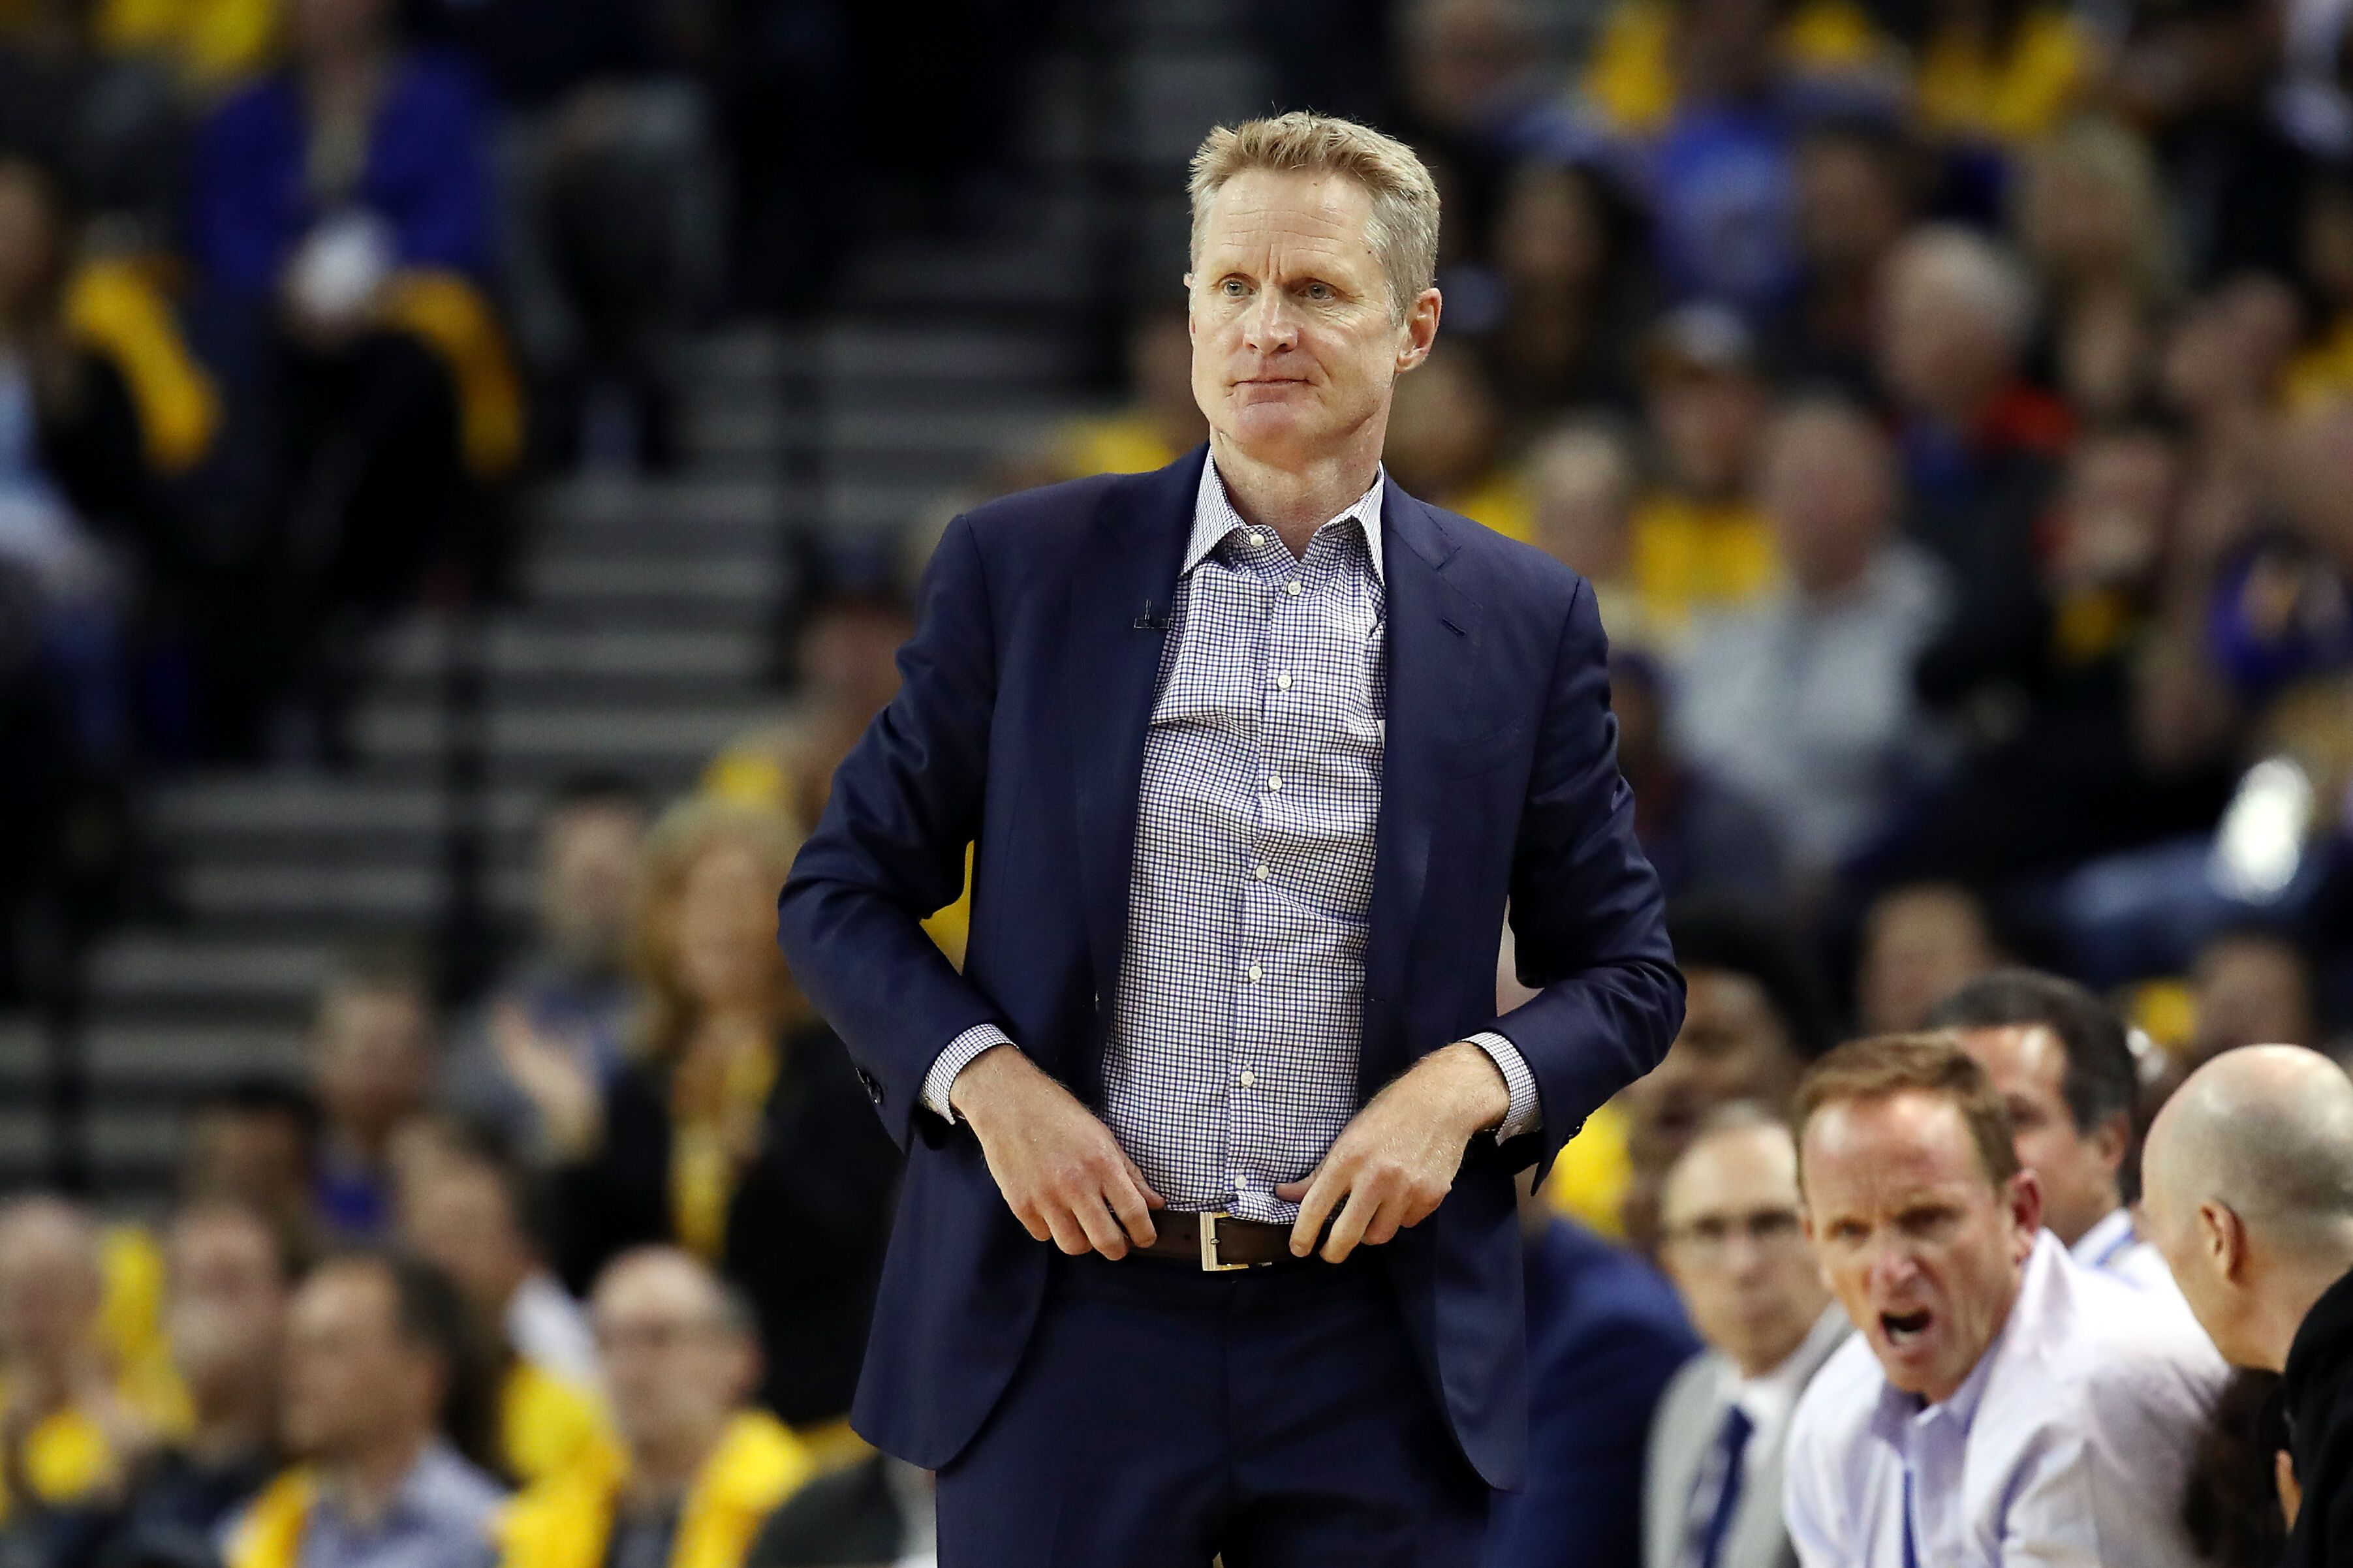 Steve Kerr of the Golden State Warriors at the game against the Portland Trail Blazers in Oakland California, in 2019 | Source: Getty Images